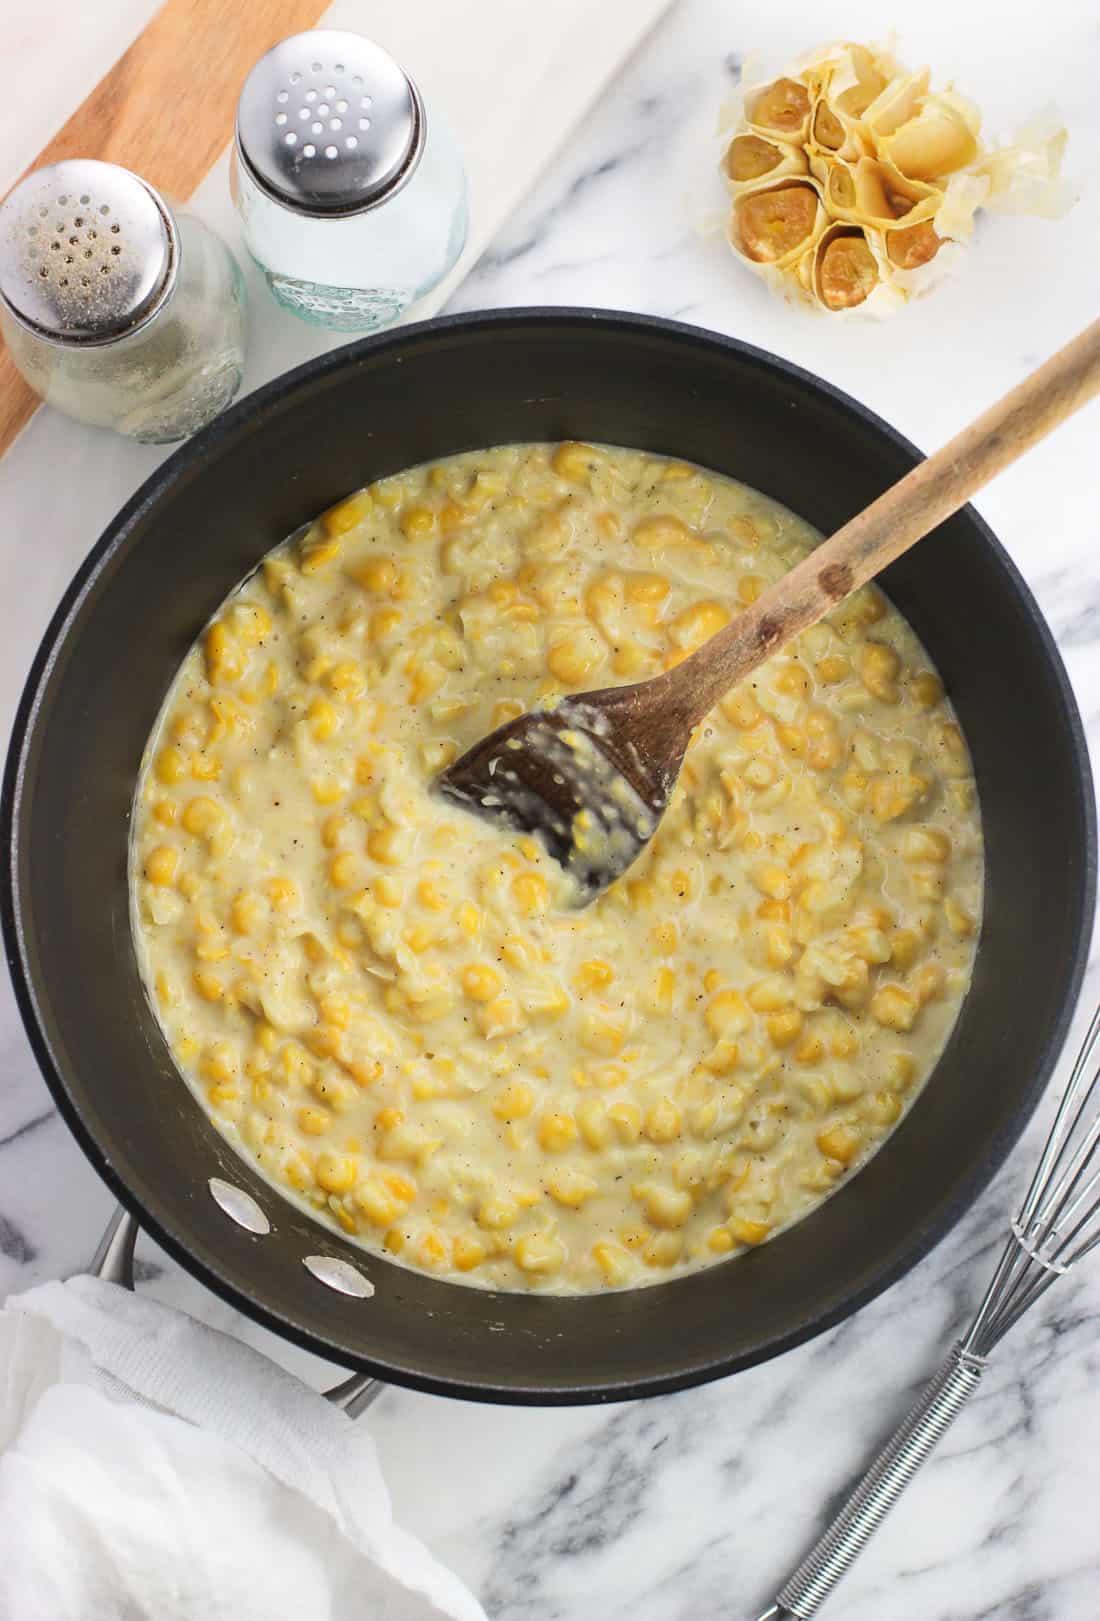 The creamed corn in the saucepan after adding back the blended portion, with a wooden spoon sticking out of the pan